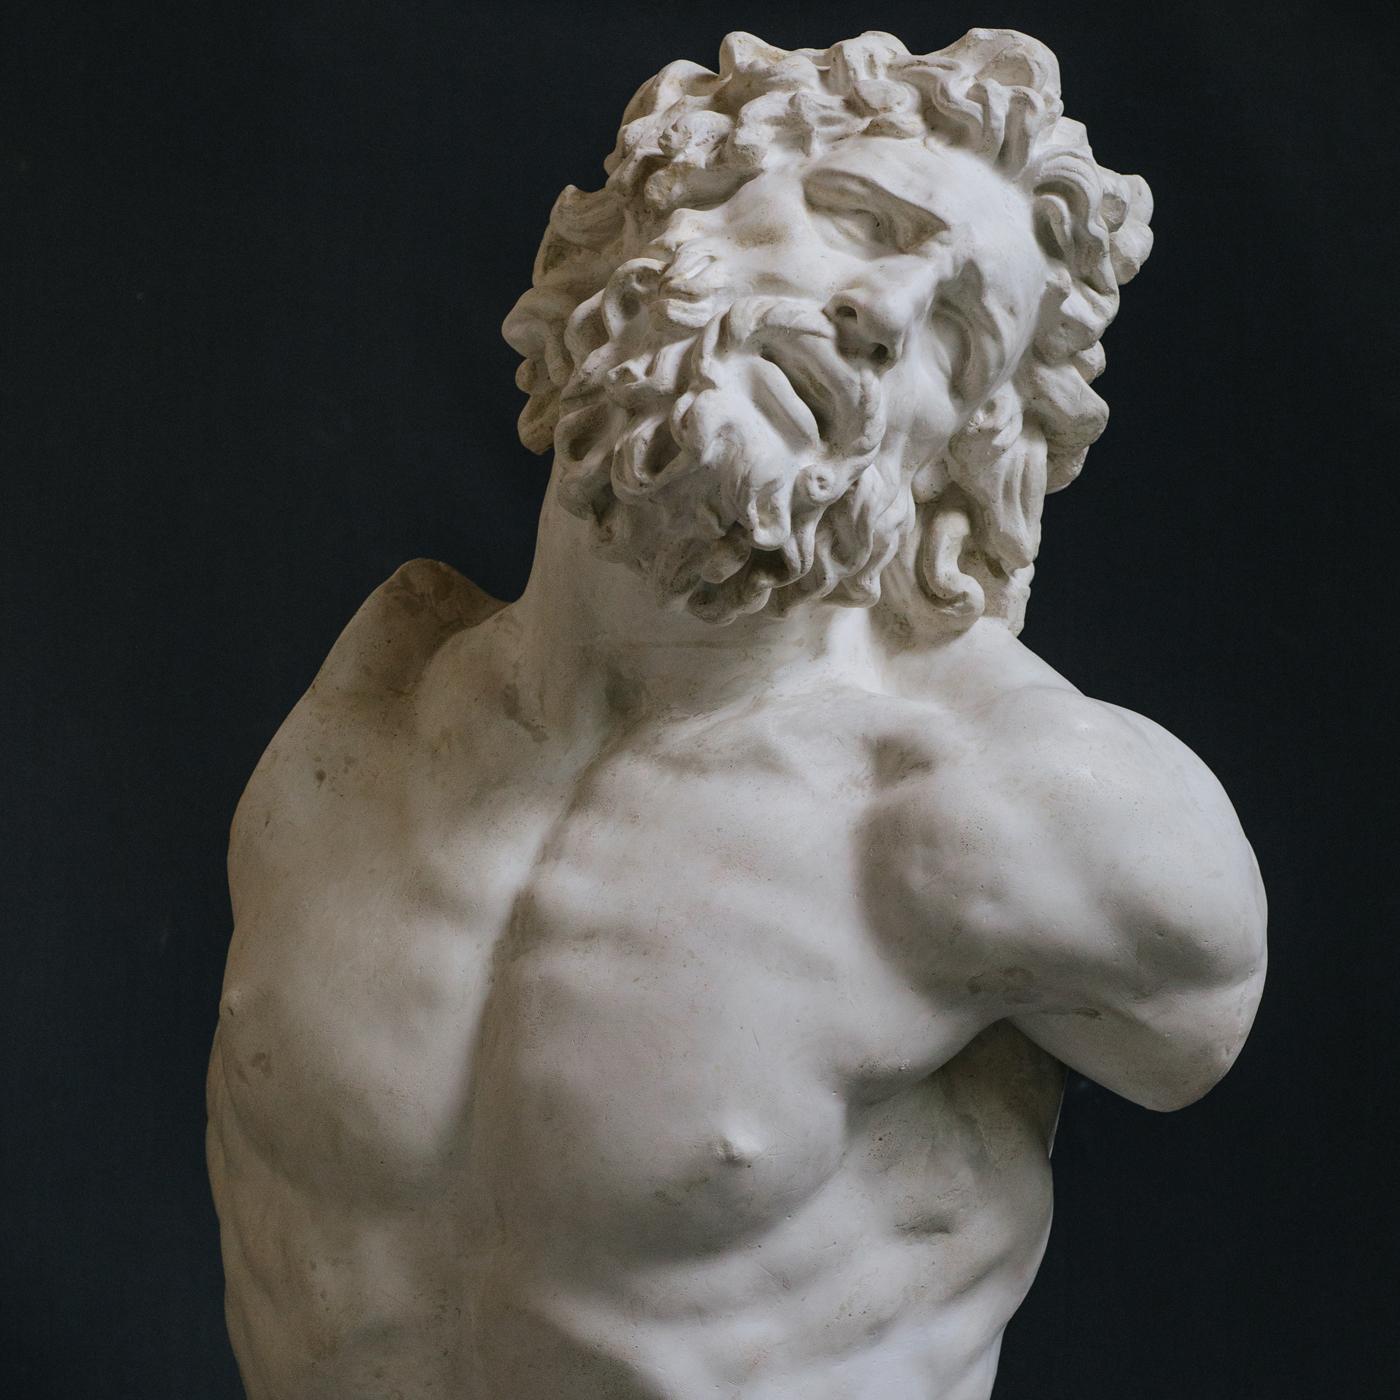 This plaster sculpture by Galleria Romanelli reproduces the bust of Laocoon, a fraction of the large renowned Roman sculptural group hosted in the Vatican Museums. The original represents the story of Laocoon, part of Homer's Odyssey, in particular